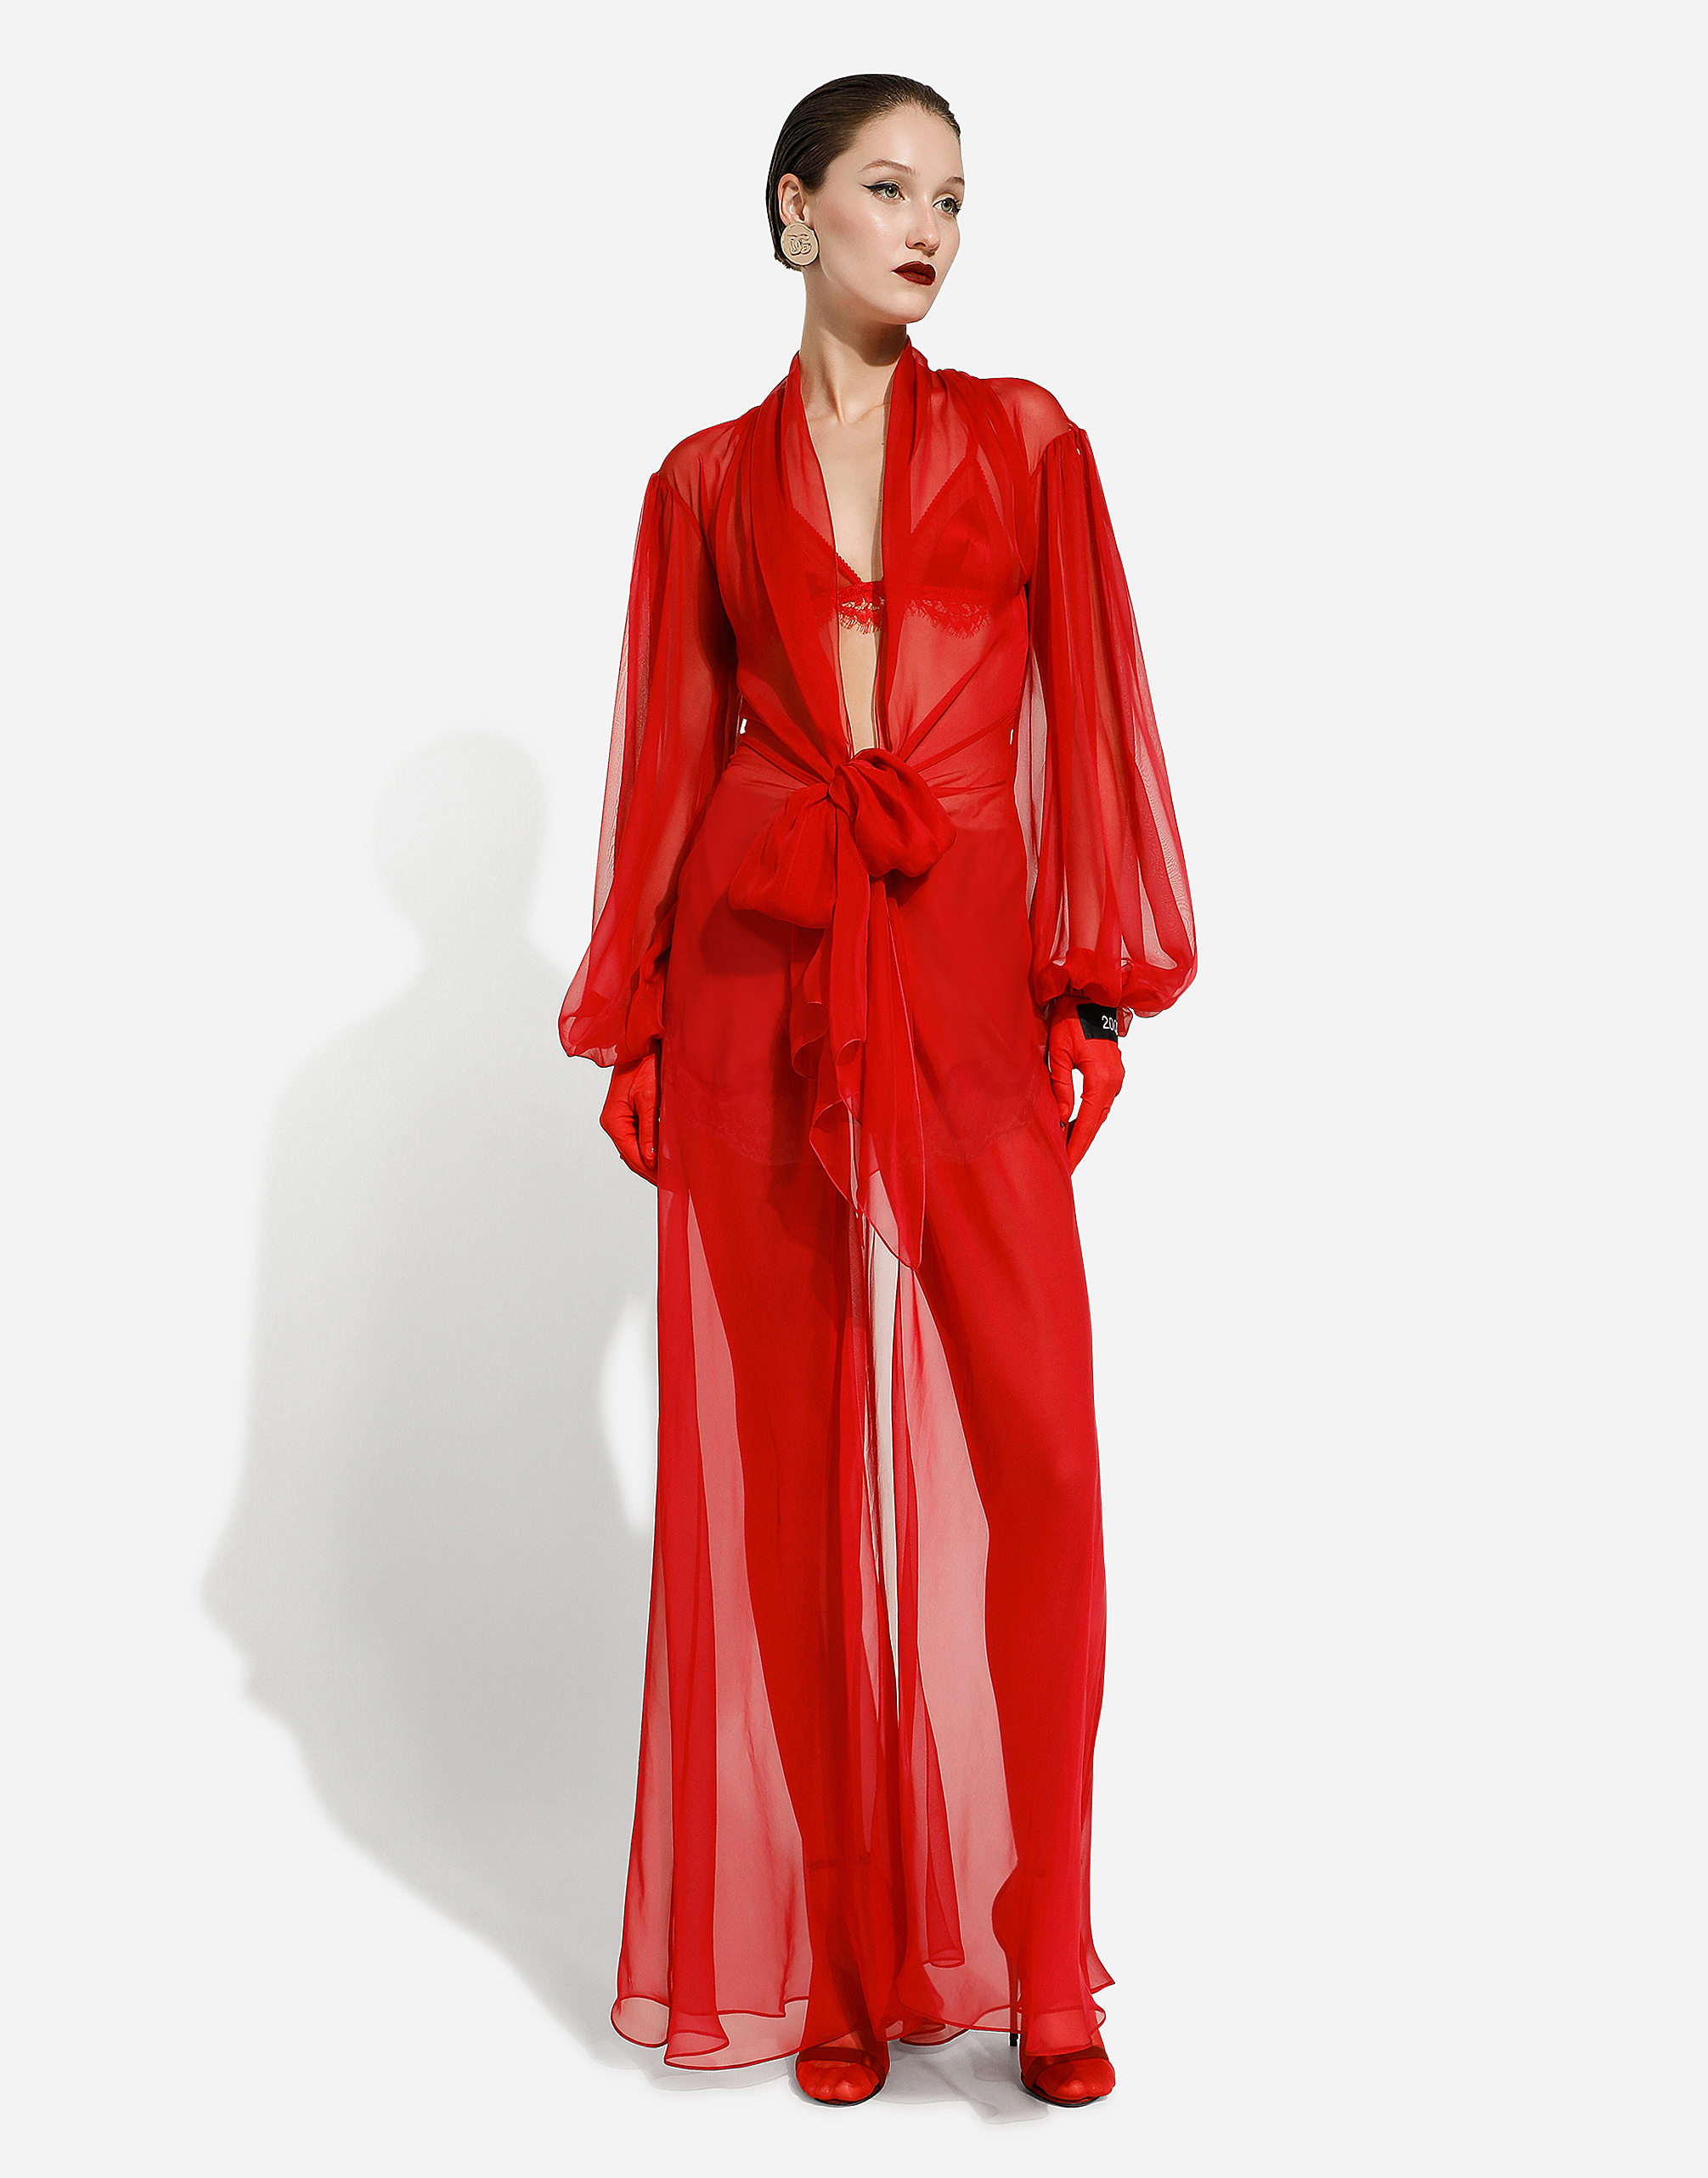 Her lip to Side Bow Satin Long Dress - ワンピース